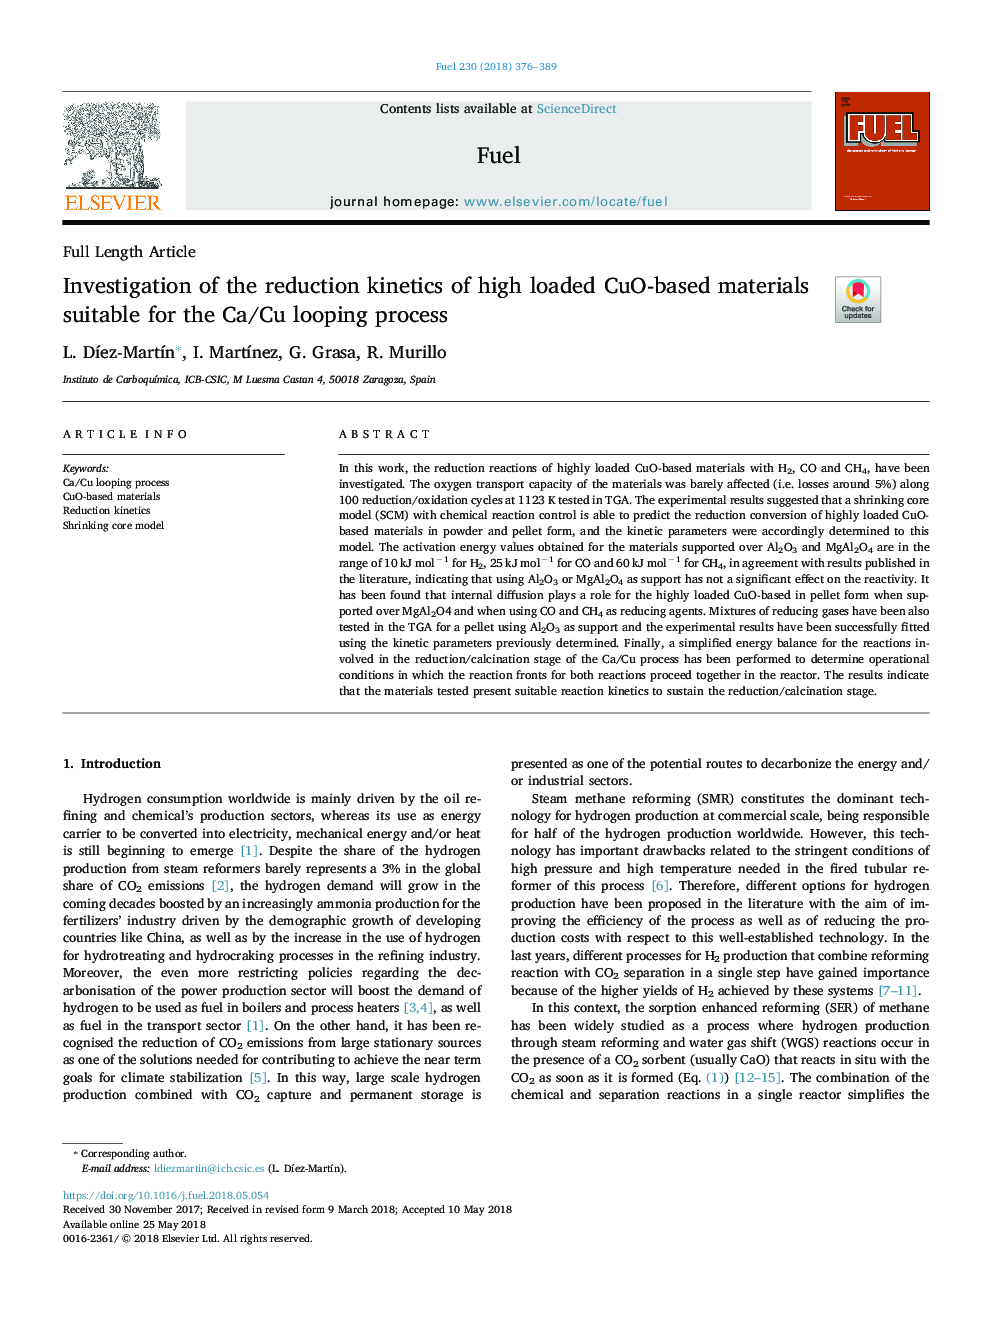 Investigation of the reduction kinetics of high loaded CuO-based materials suitable for the Ca/Cu looping process